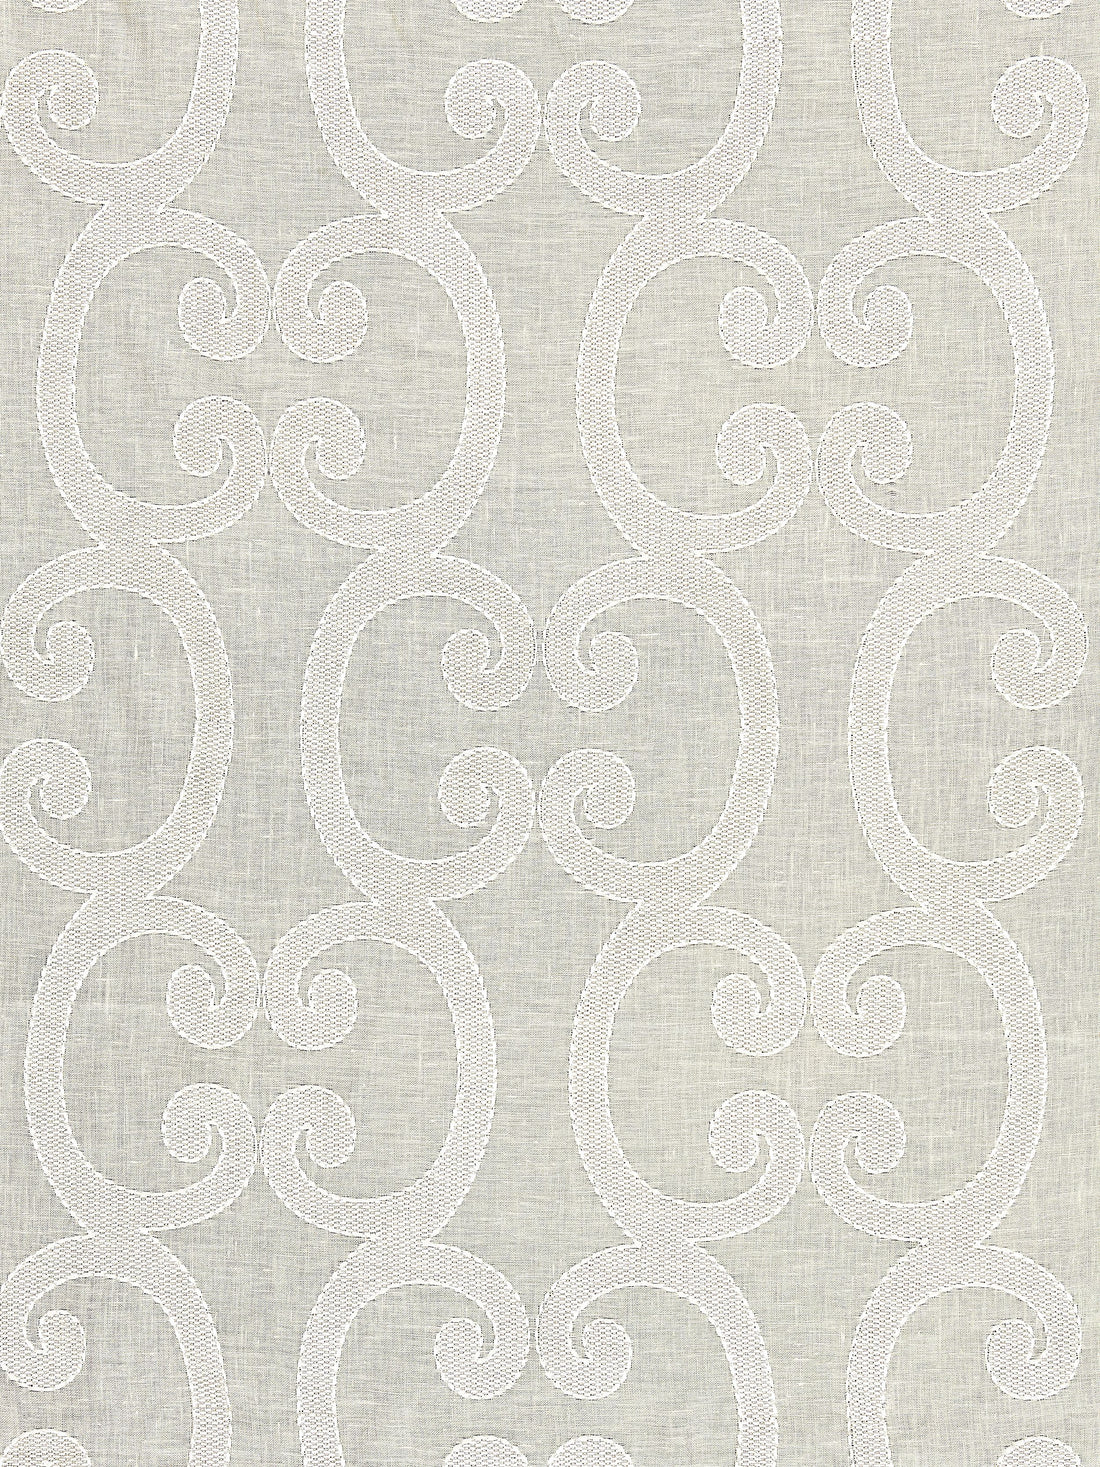 Ornamento Sheer fabric in champagne color - pattern number SC 000227040 - by Scalamandre in the Scalamandre Fabrics Book 1 collection